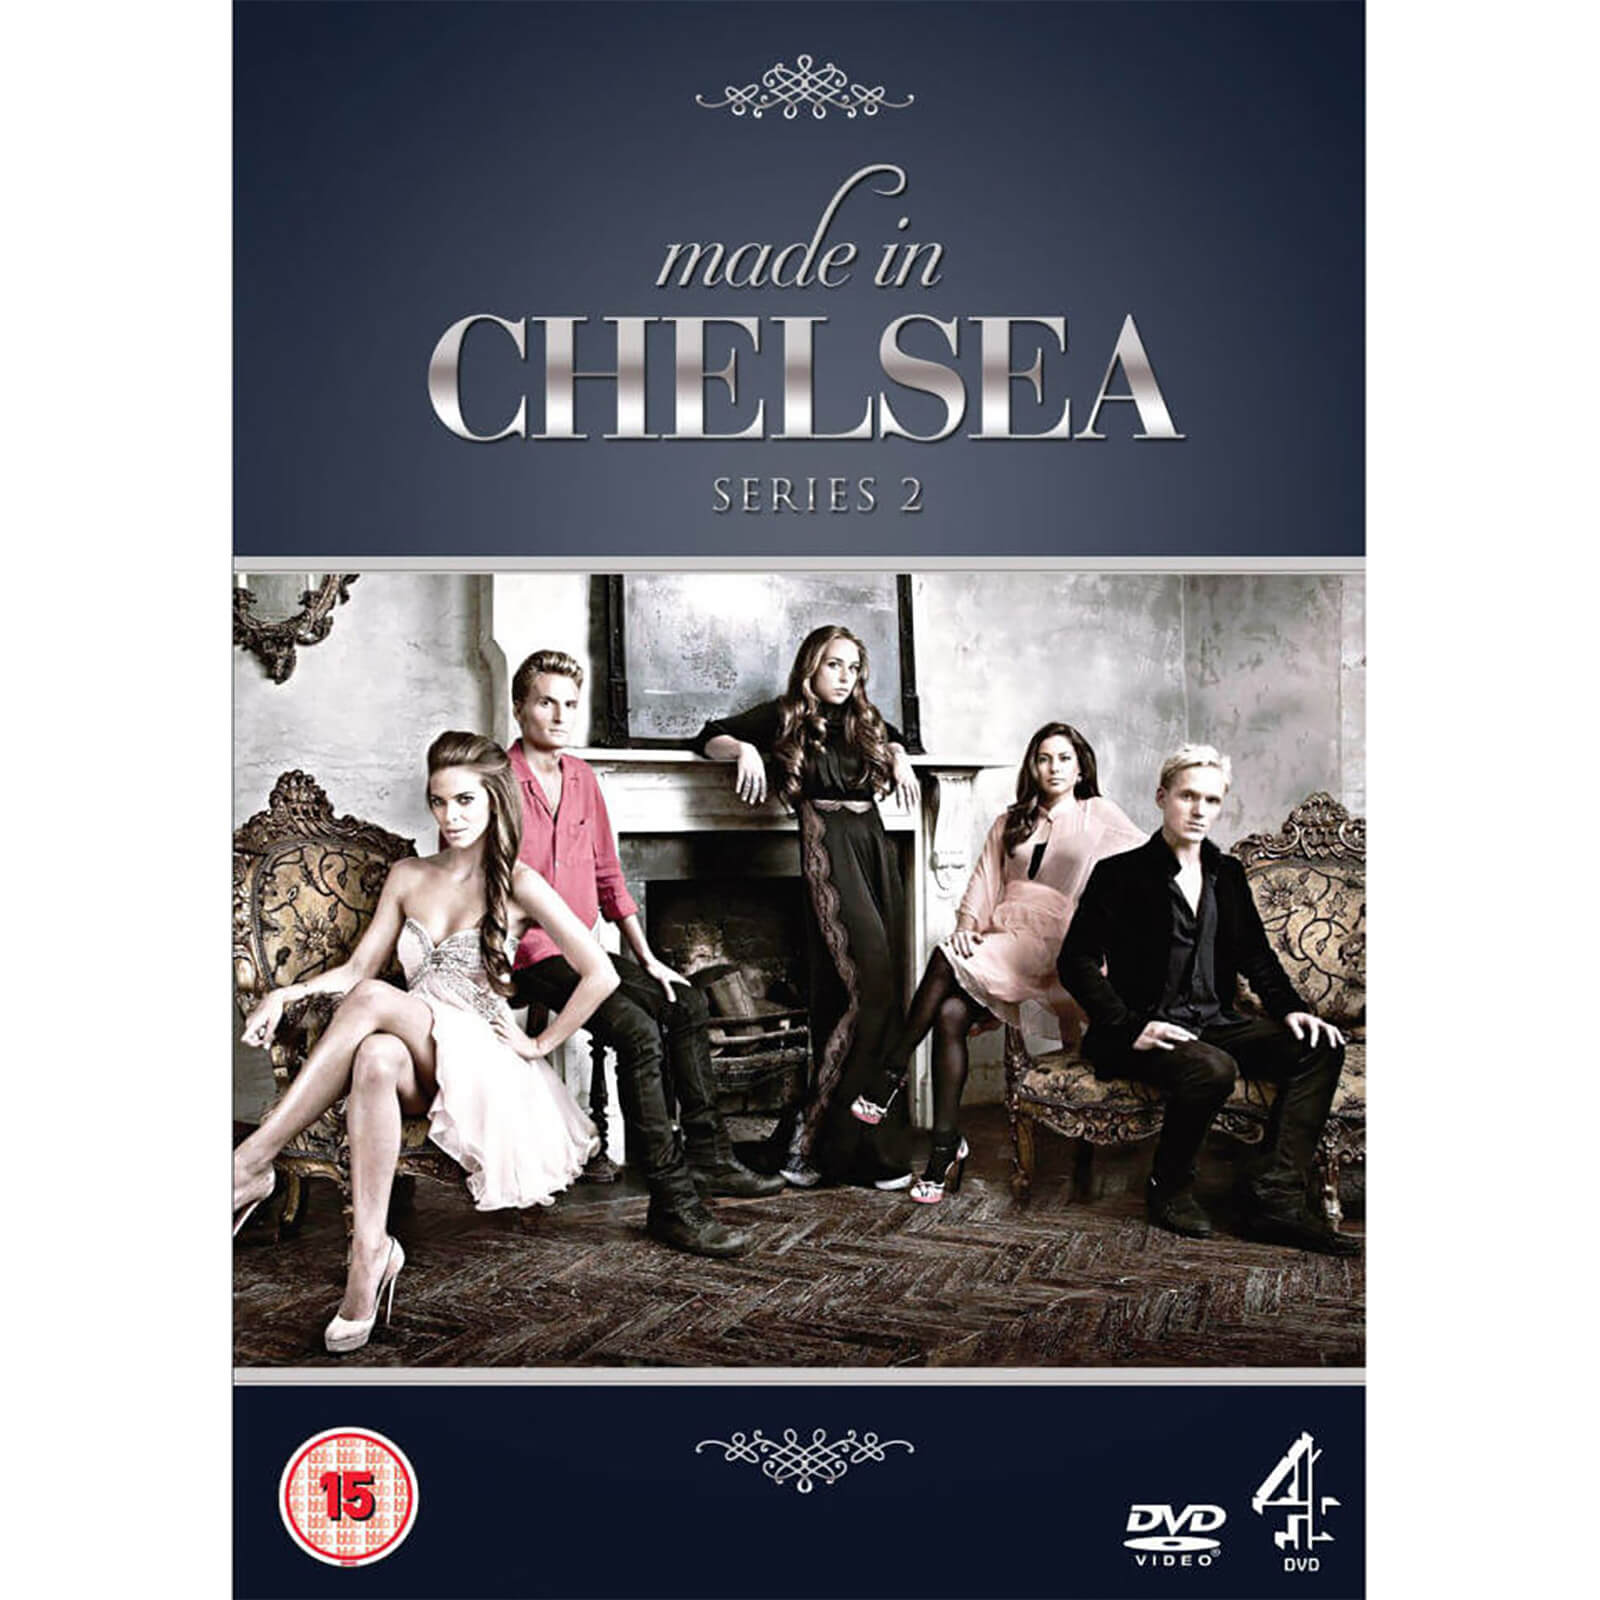 Made In Chelsea Series 2. Go to Zavvi to purchase this item. 